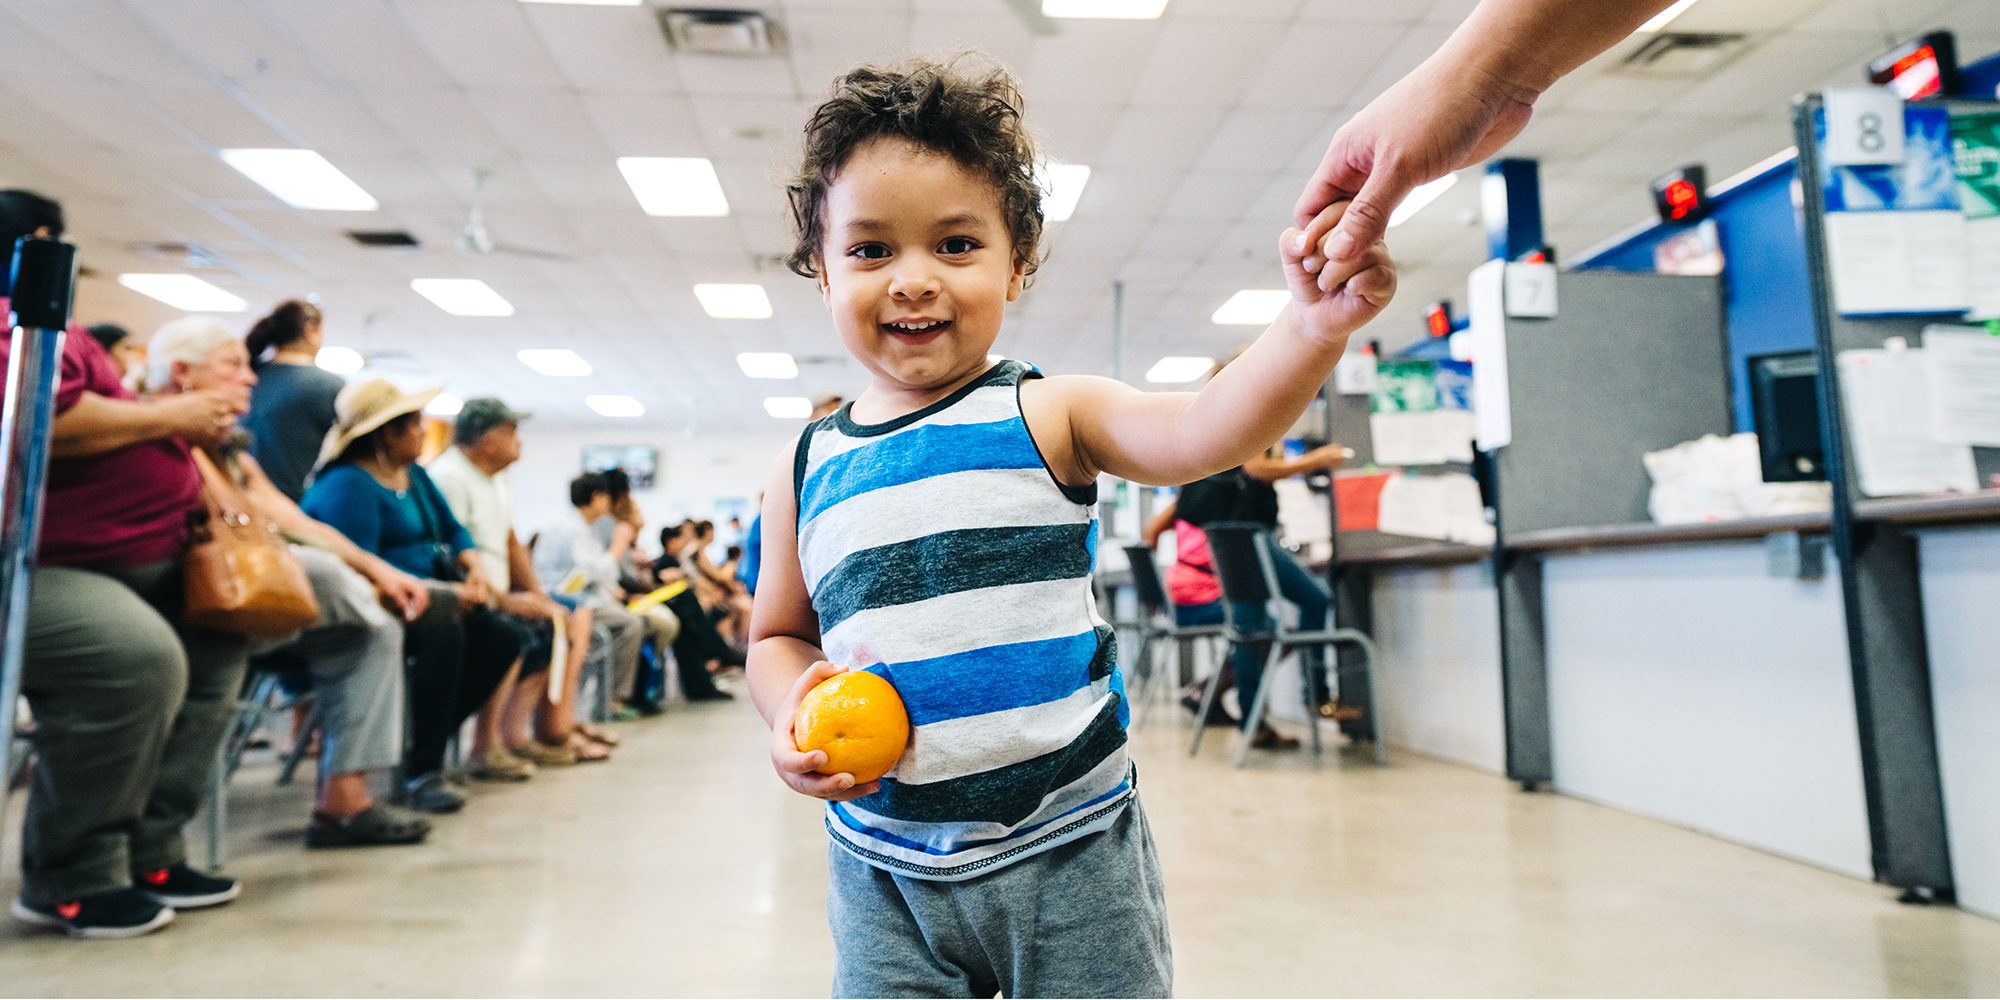 A young boy smiles while holding an orange at a summer meals program